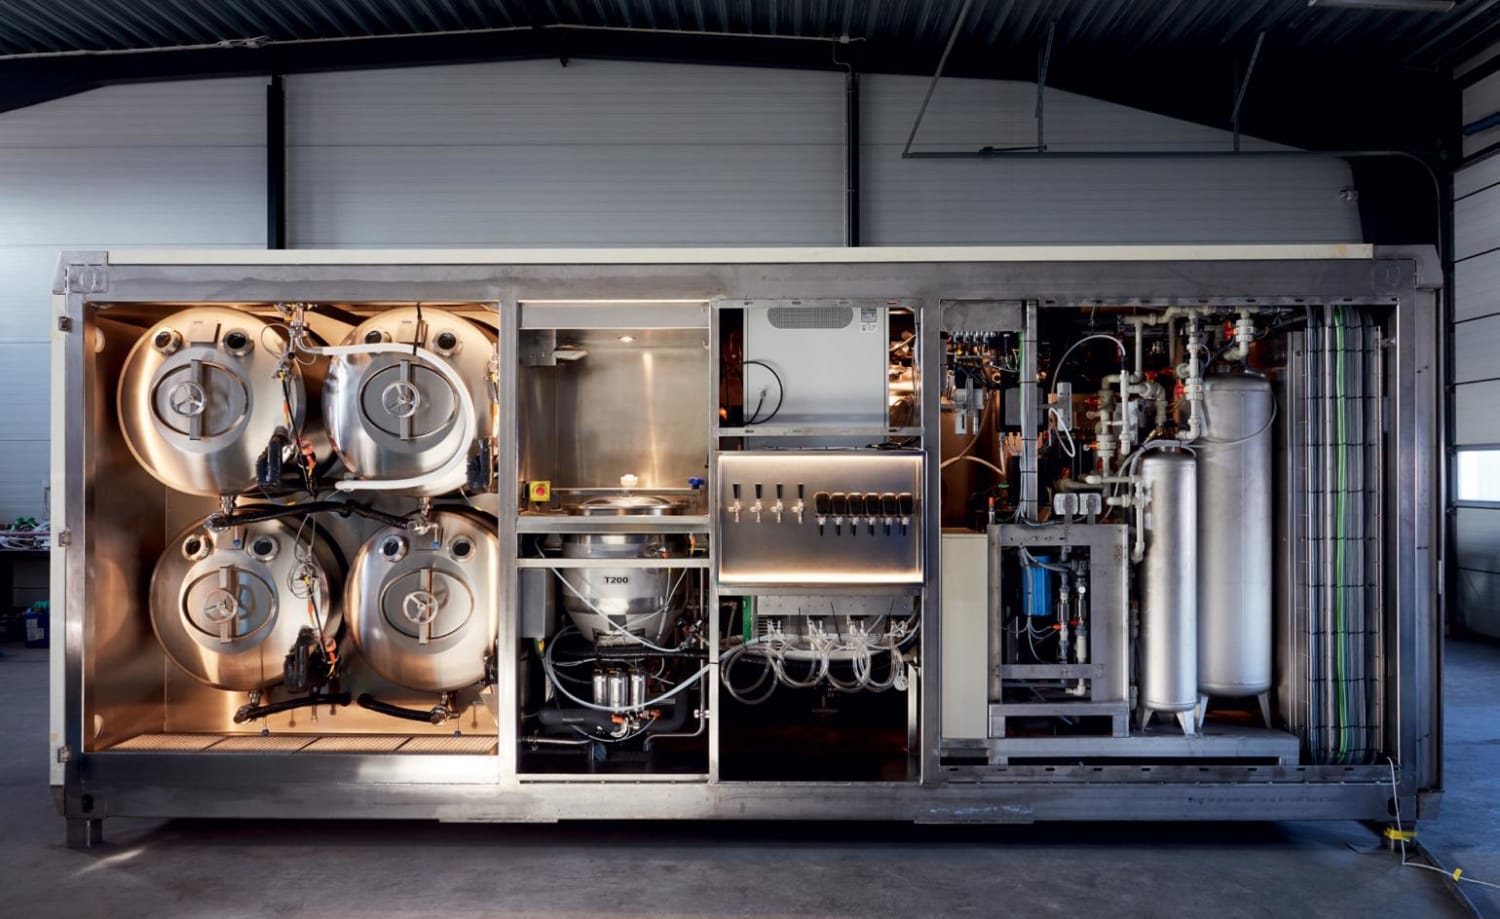 A solar-powered microbrewery has design-led energy in Sweden